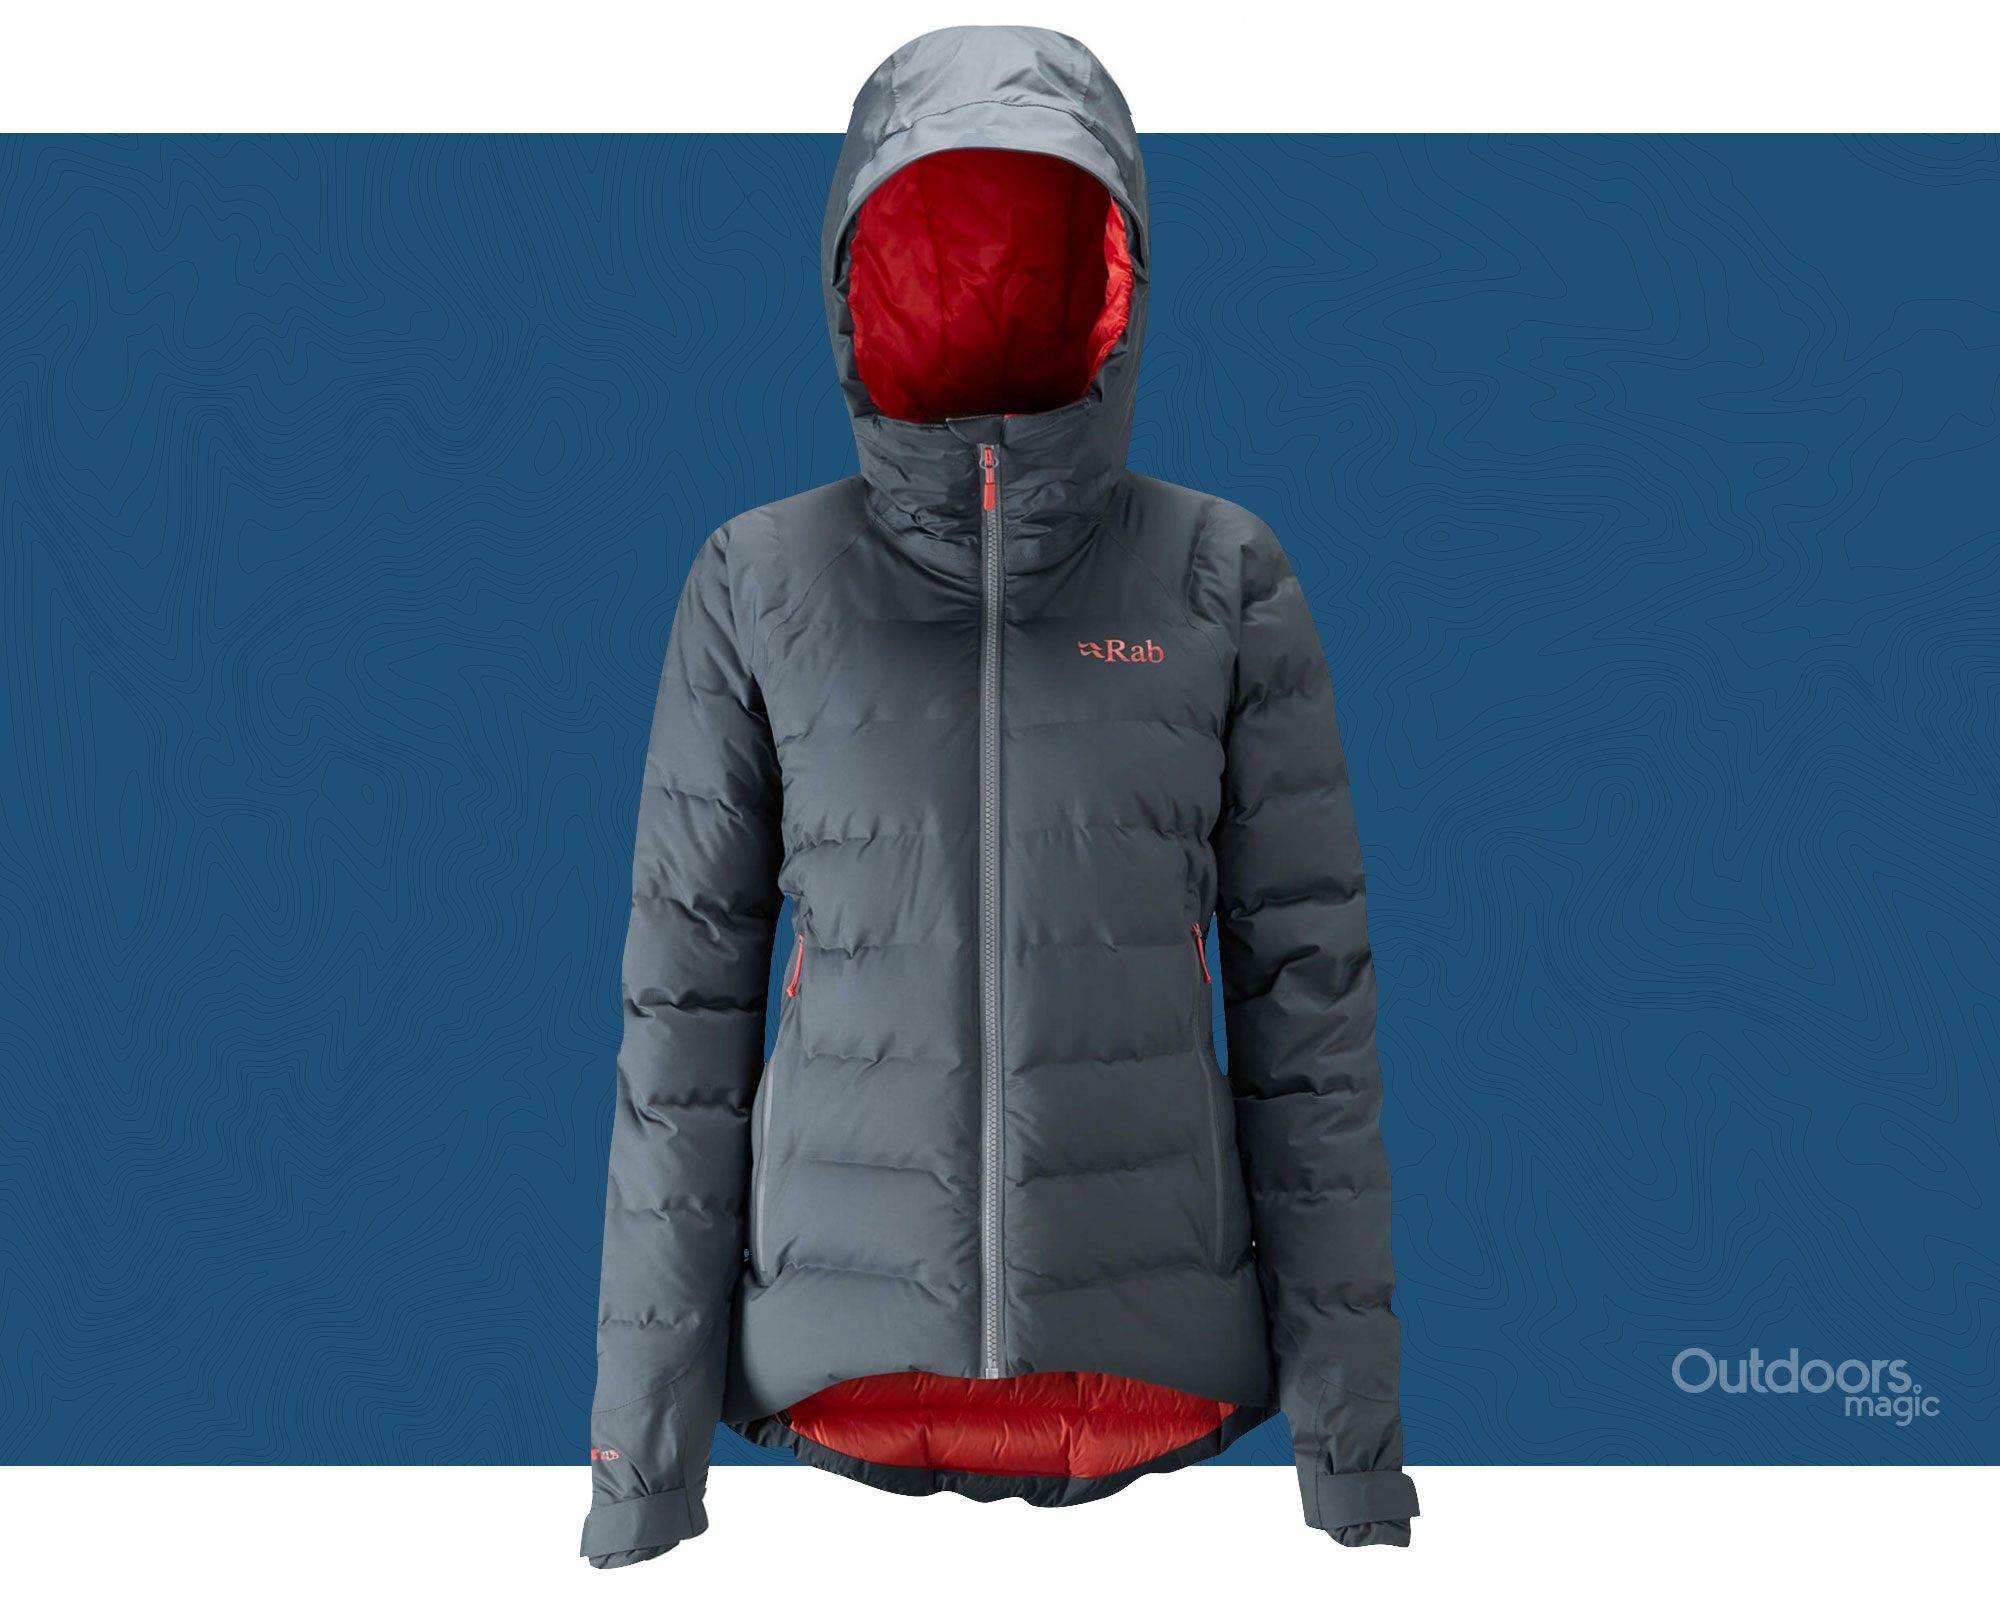 Best Down Insulated Jackets For Women 2019 | Top 7